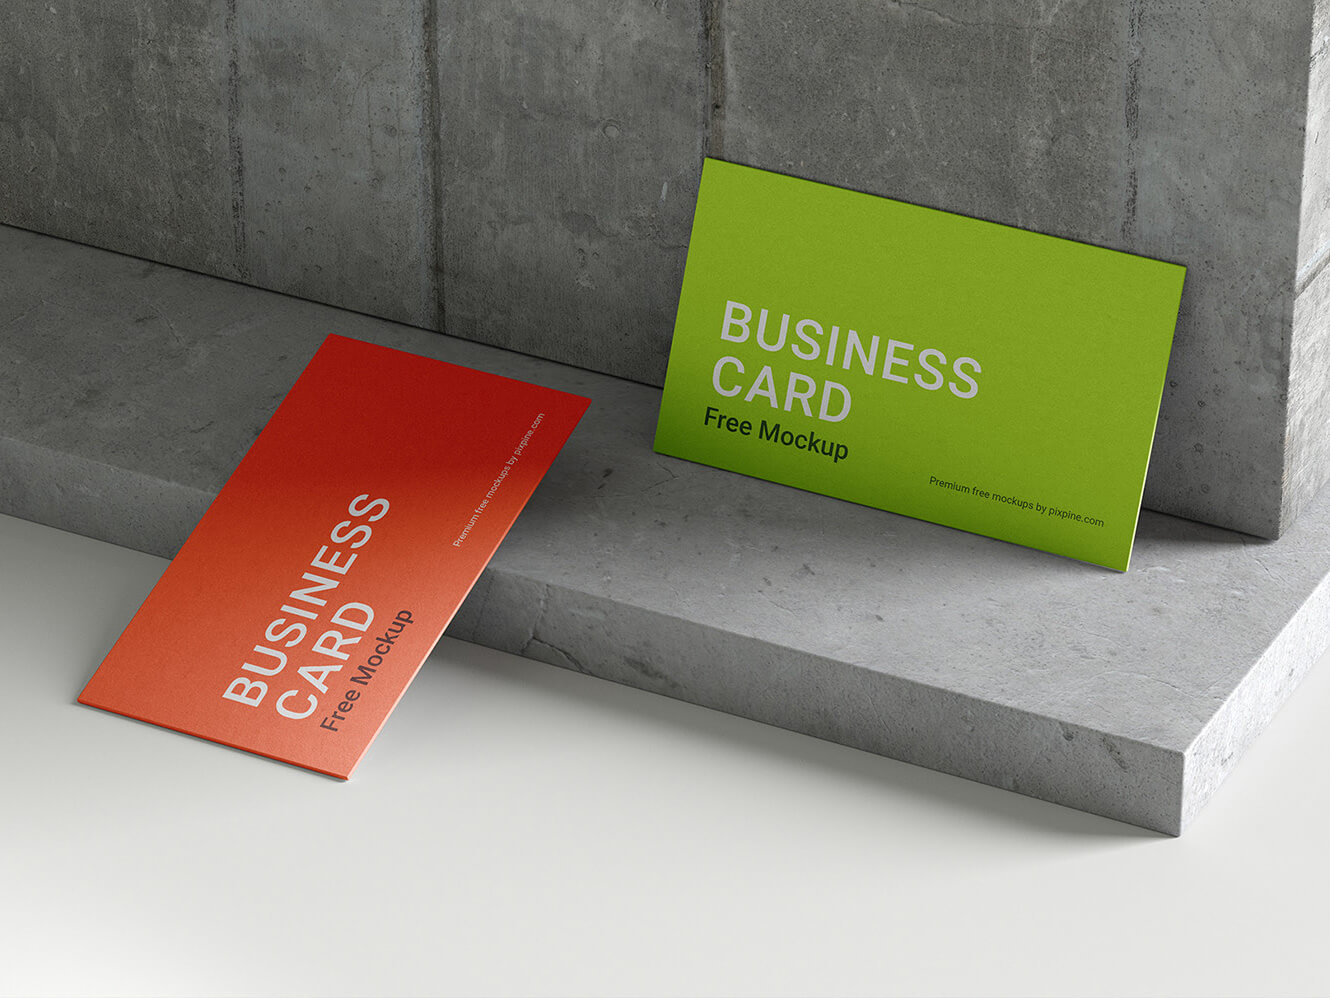 Concrete Wall Business Card Mockup